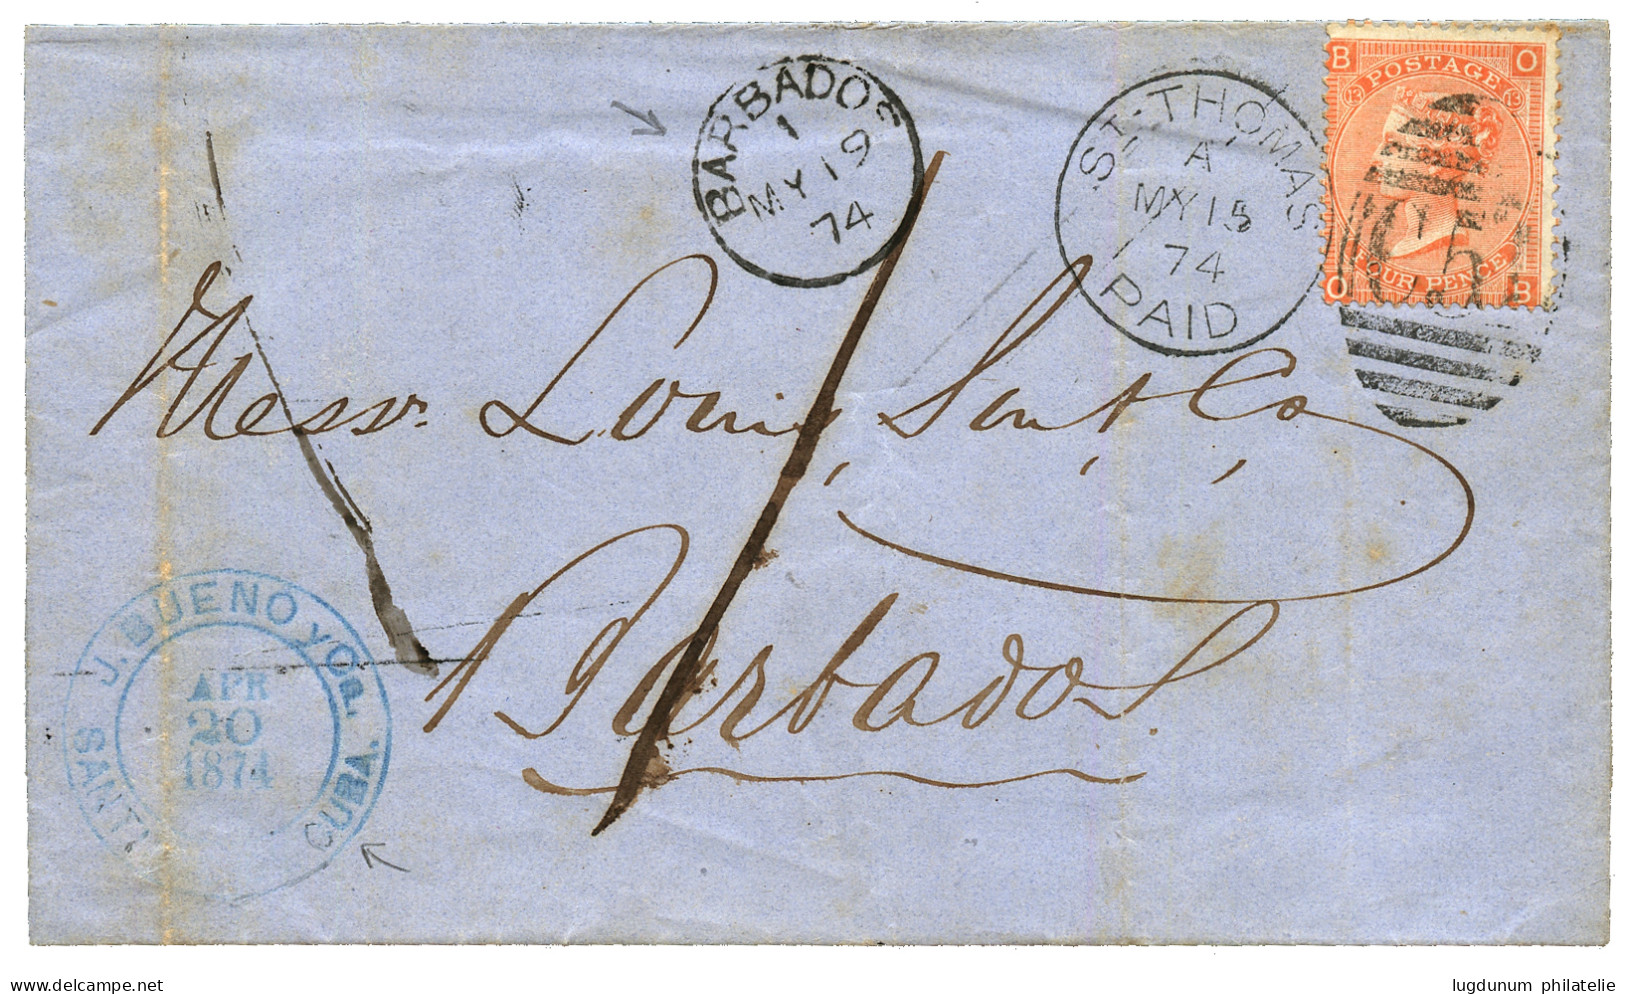 "CUBA Via DANISH WEST INDIES To BARBADOS" : 1874 4d Canc. C51 + ST THOMAS PAID + "1" Tax Marking + BARBADOS Cds On Cover - Danimarca (Antille)